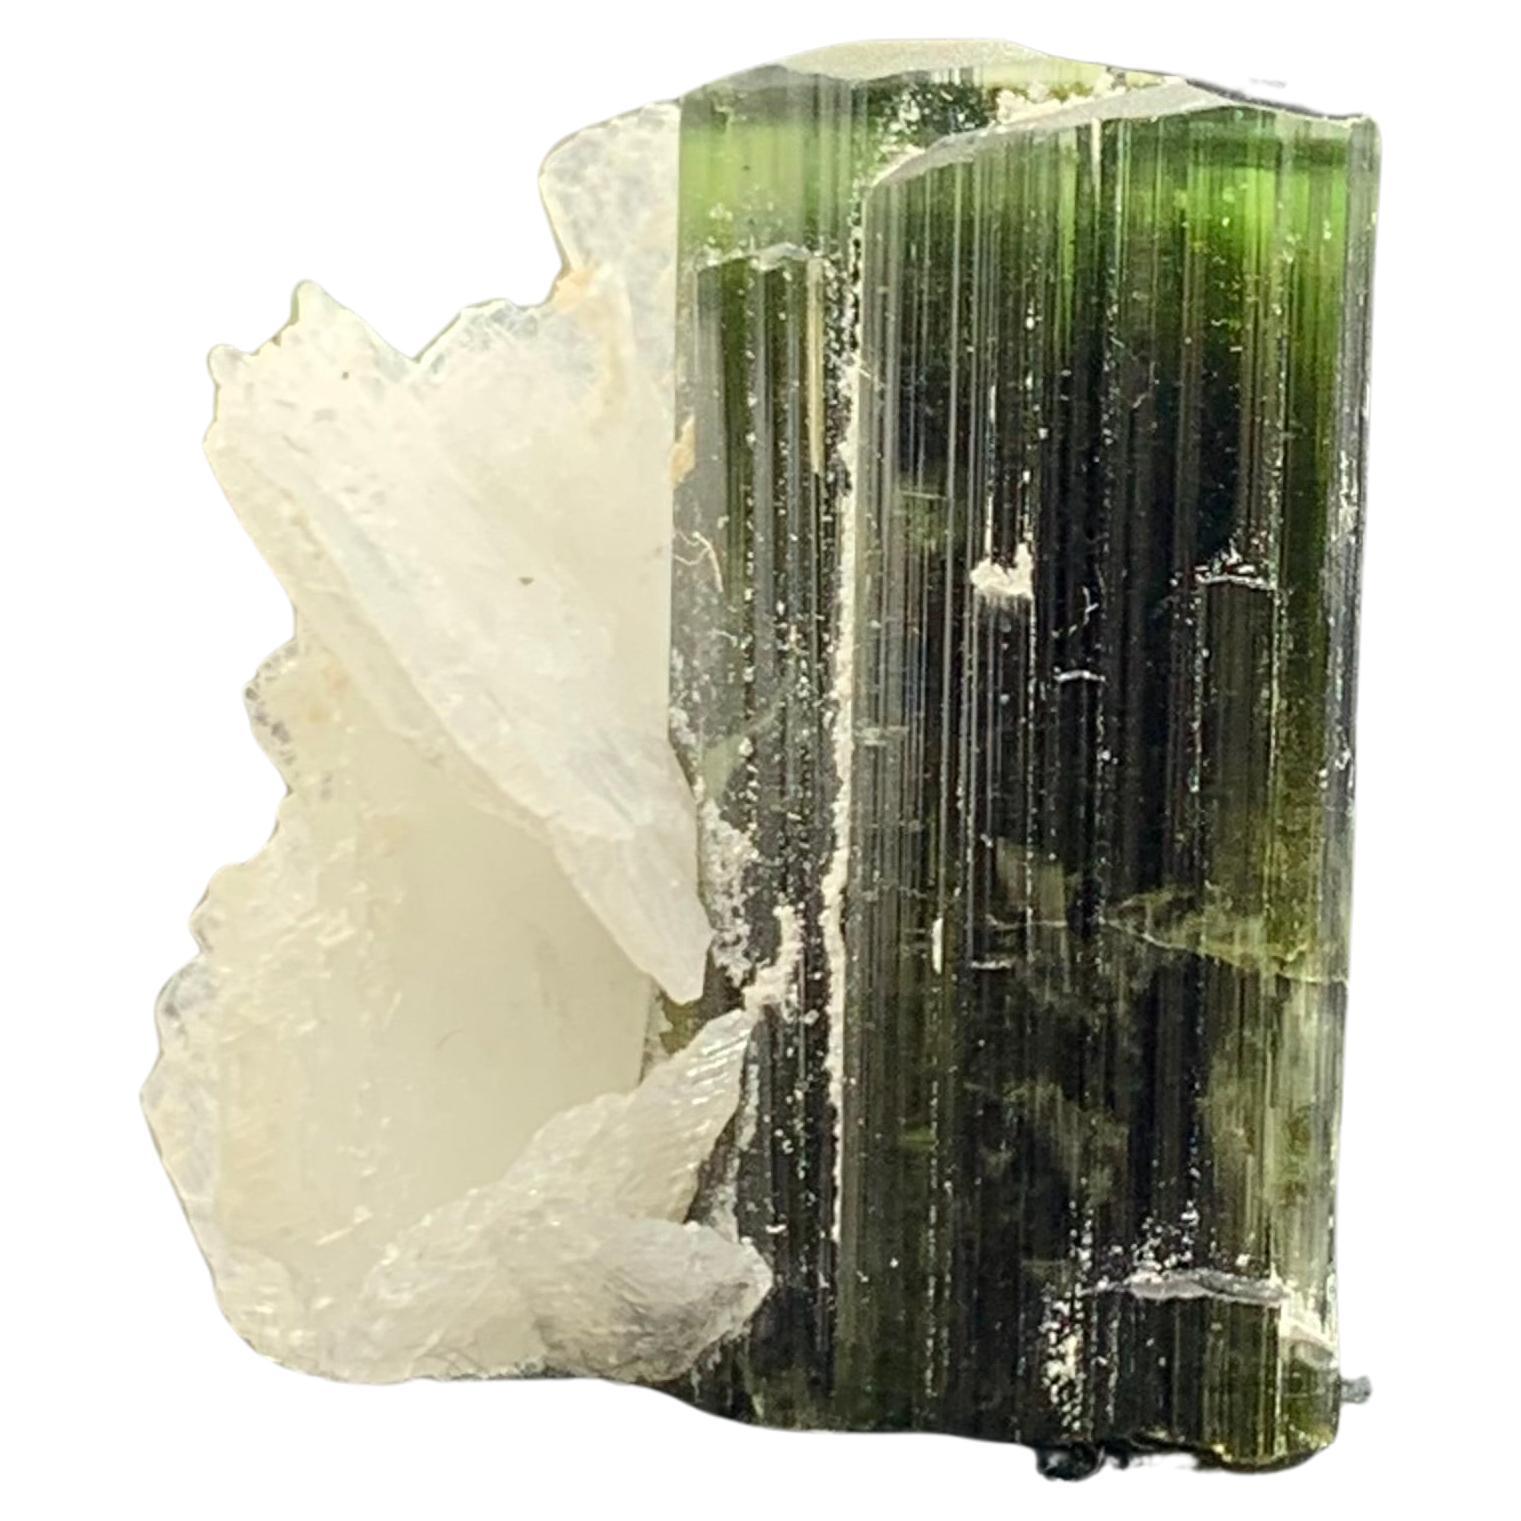 46.95 Cts Lovely Tourmaline With Albite Specimen From Stak Nala Valley, Pakistan For Sale